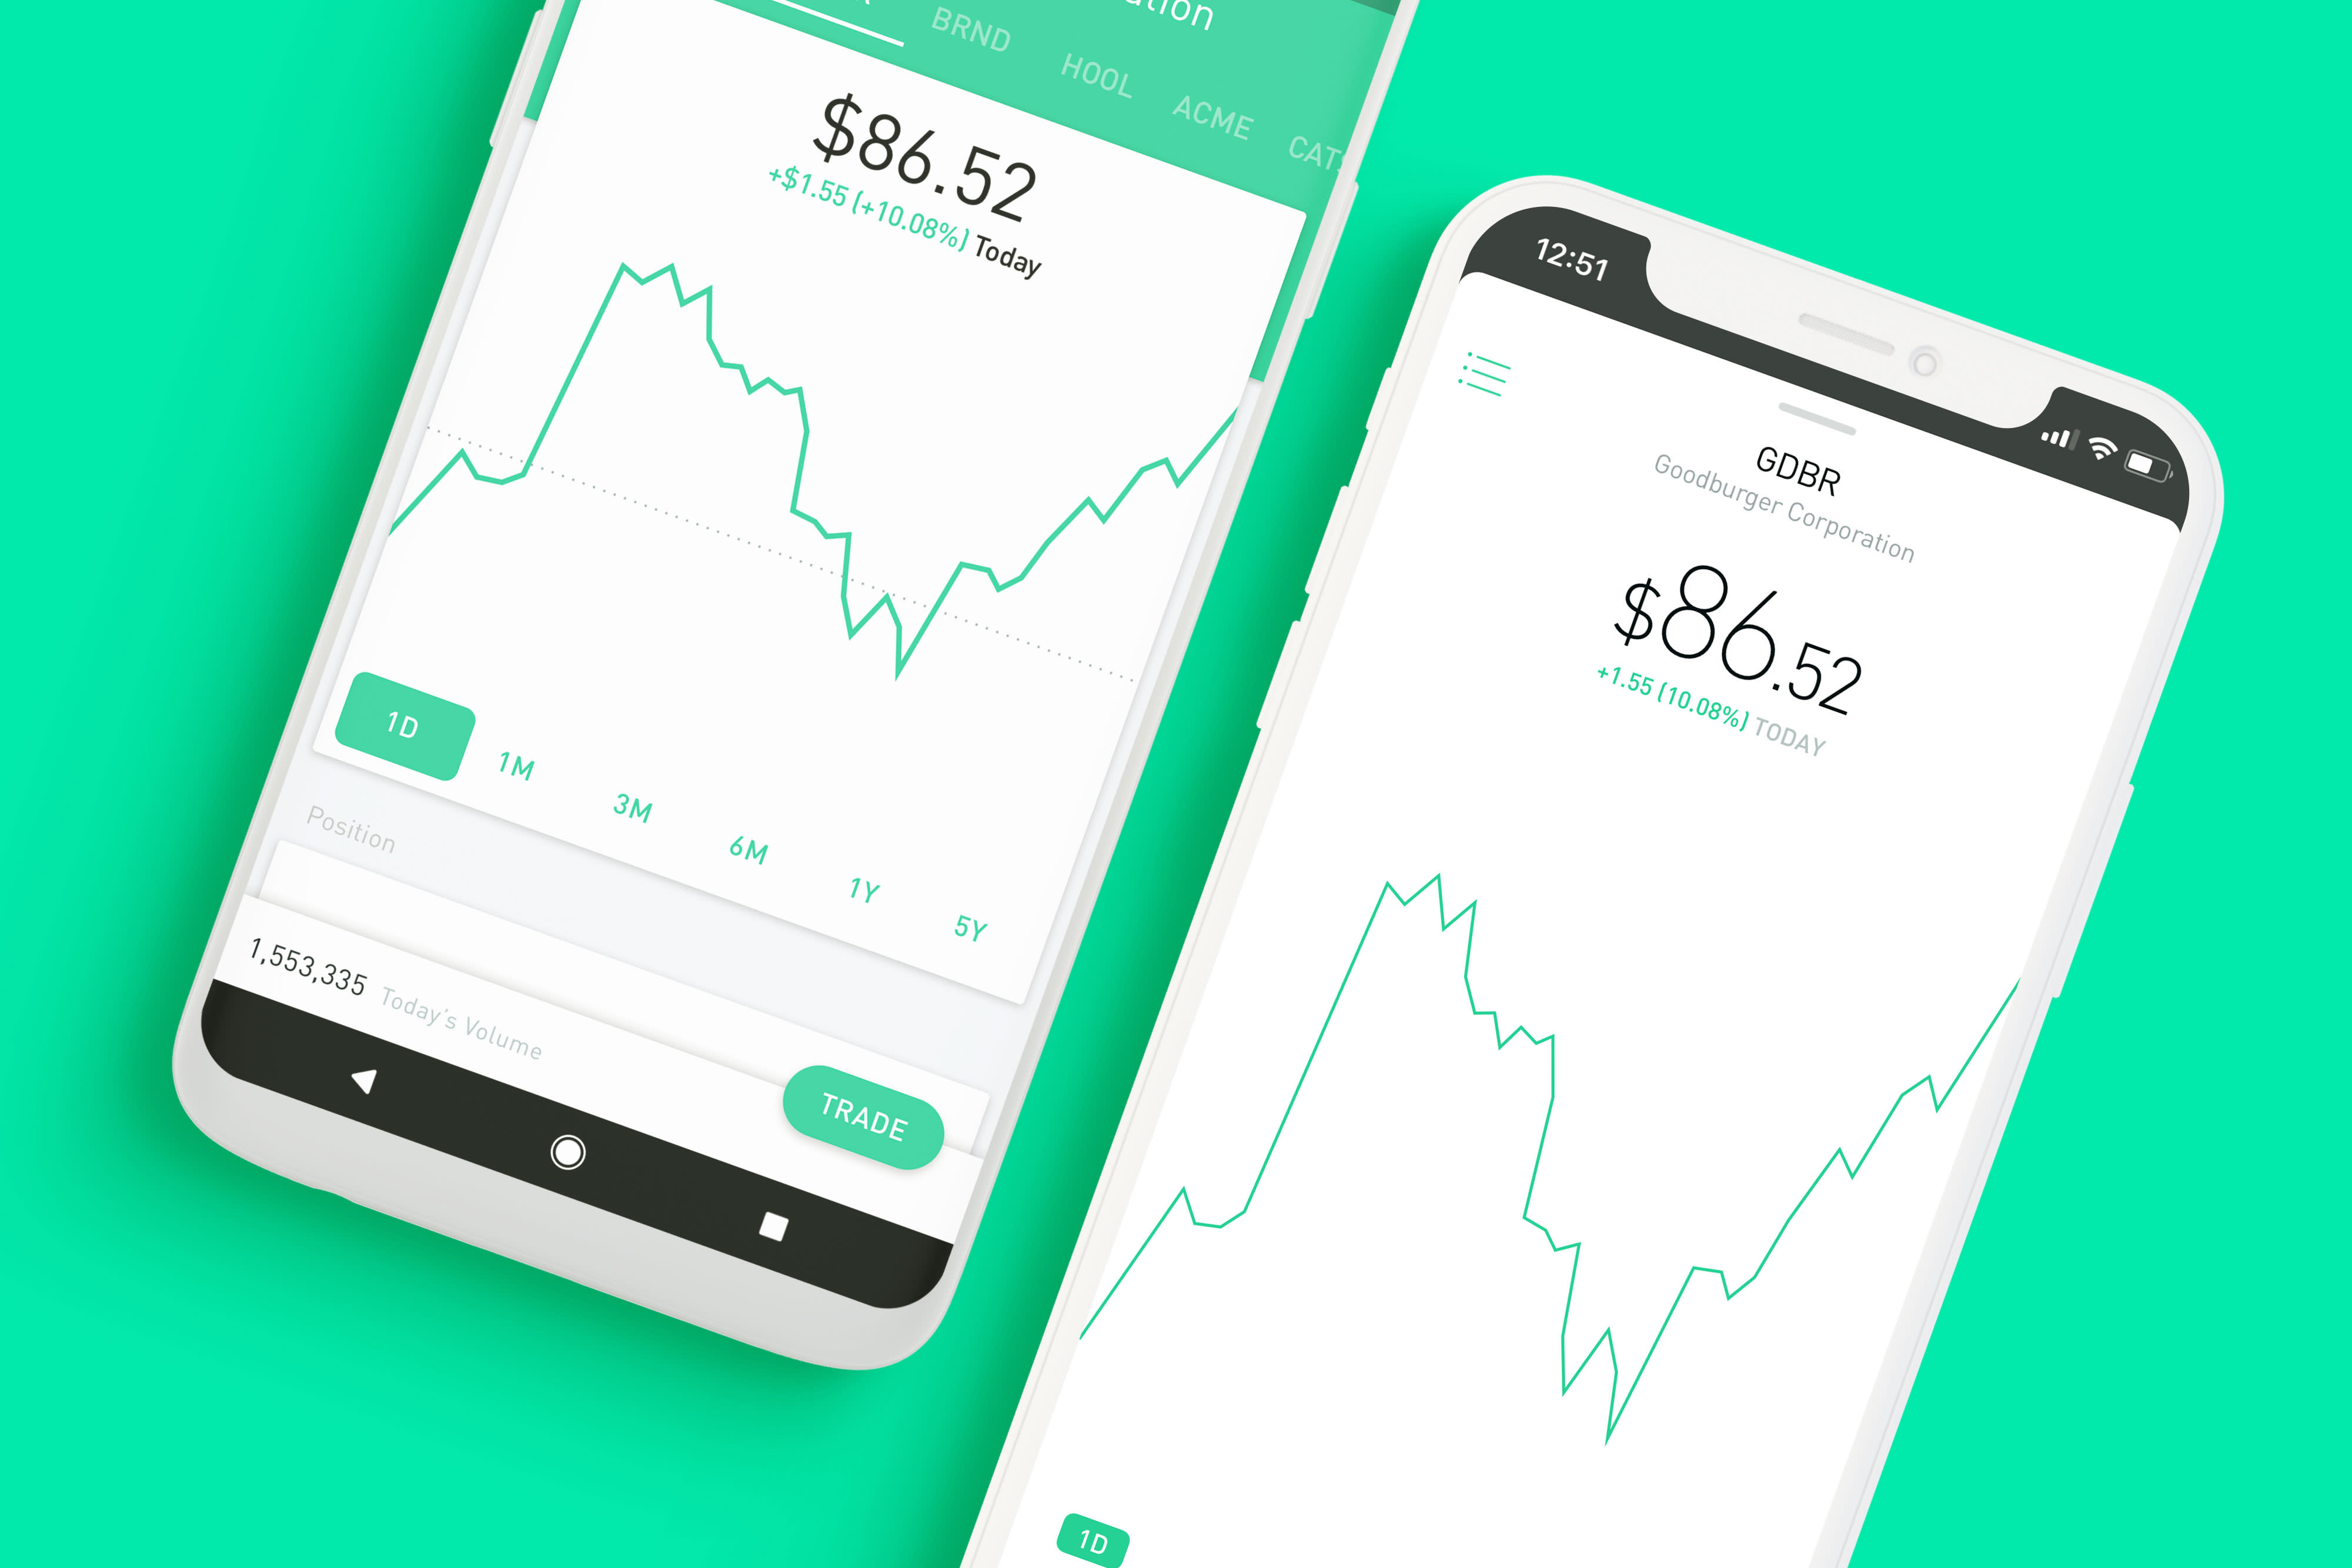 Robinhood users lash out on Twitter as outage keeps them on sidelines